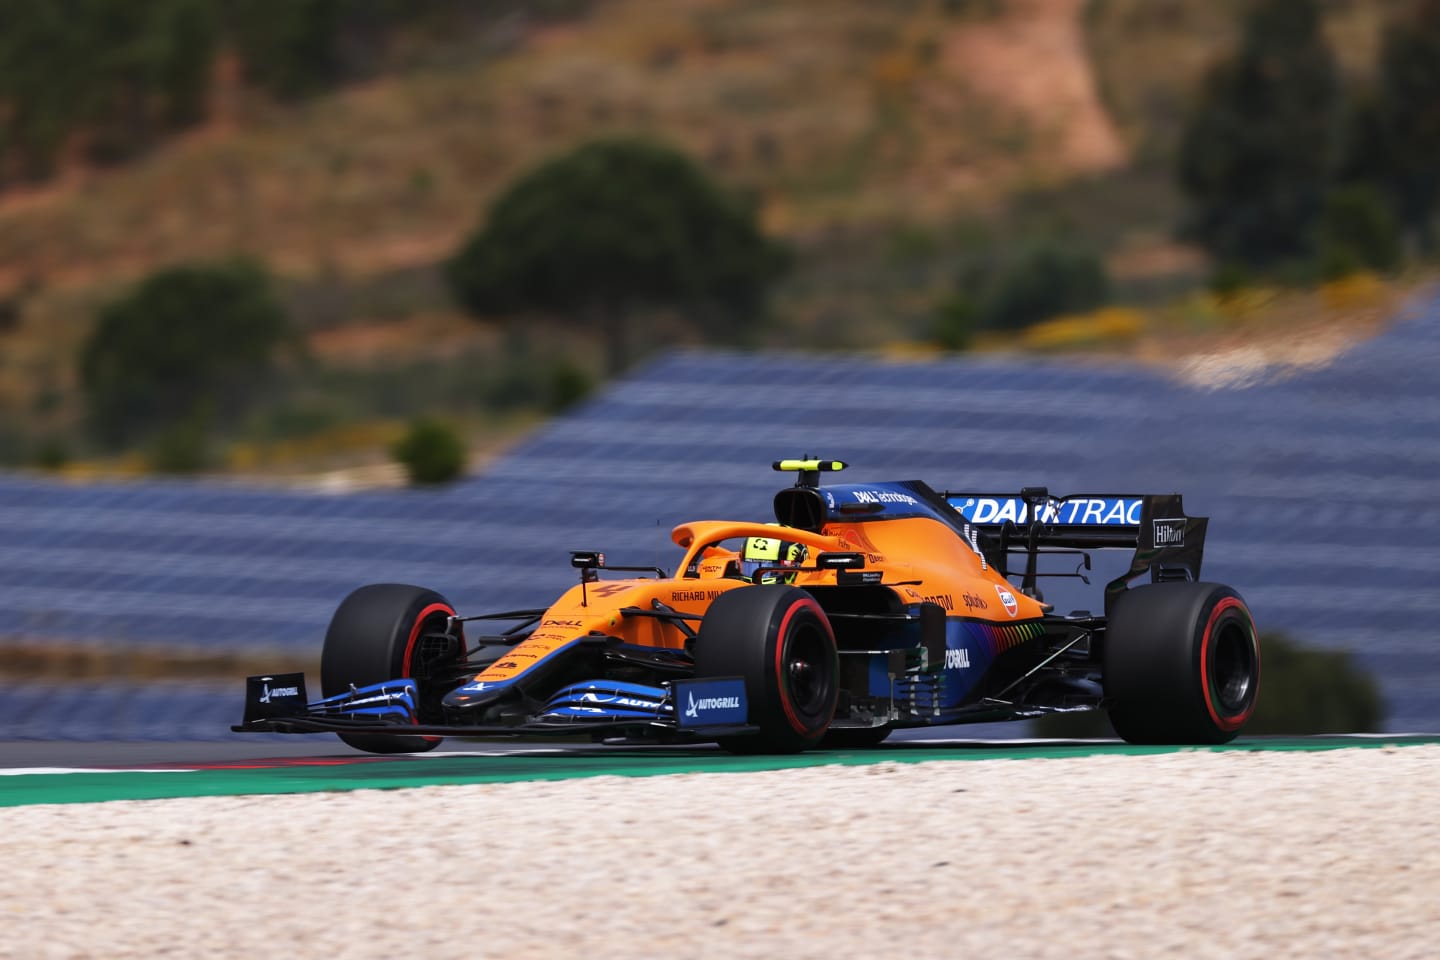 PORTIMAO, PORTUGAL - MAY 01: Lando Norris of Great Britain driving the (4) McLaren F1 Team MCL35M Mercedes on track during final practice for the F1 Grand Prix of Portugal at Autodromo Internacional Do Algarve on May 01, 2021 in Portimao, Portugal. (Photo by Lars Baron/Getty Images)